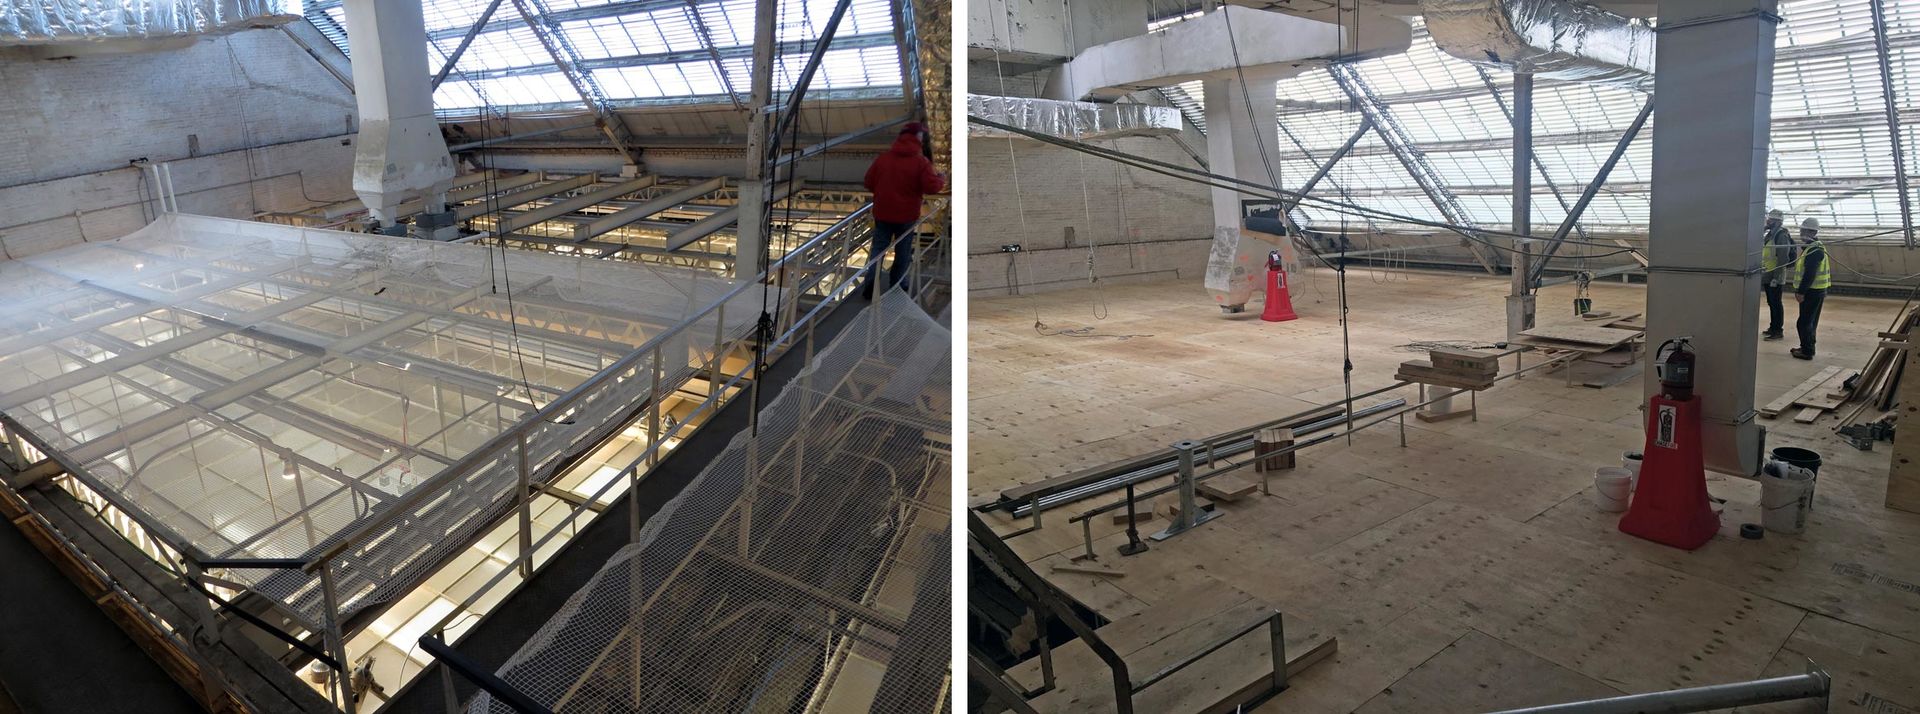 Two views of attic space above The Met's European Paintings galleries during extensive construction activity